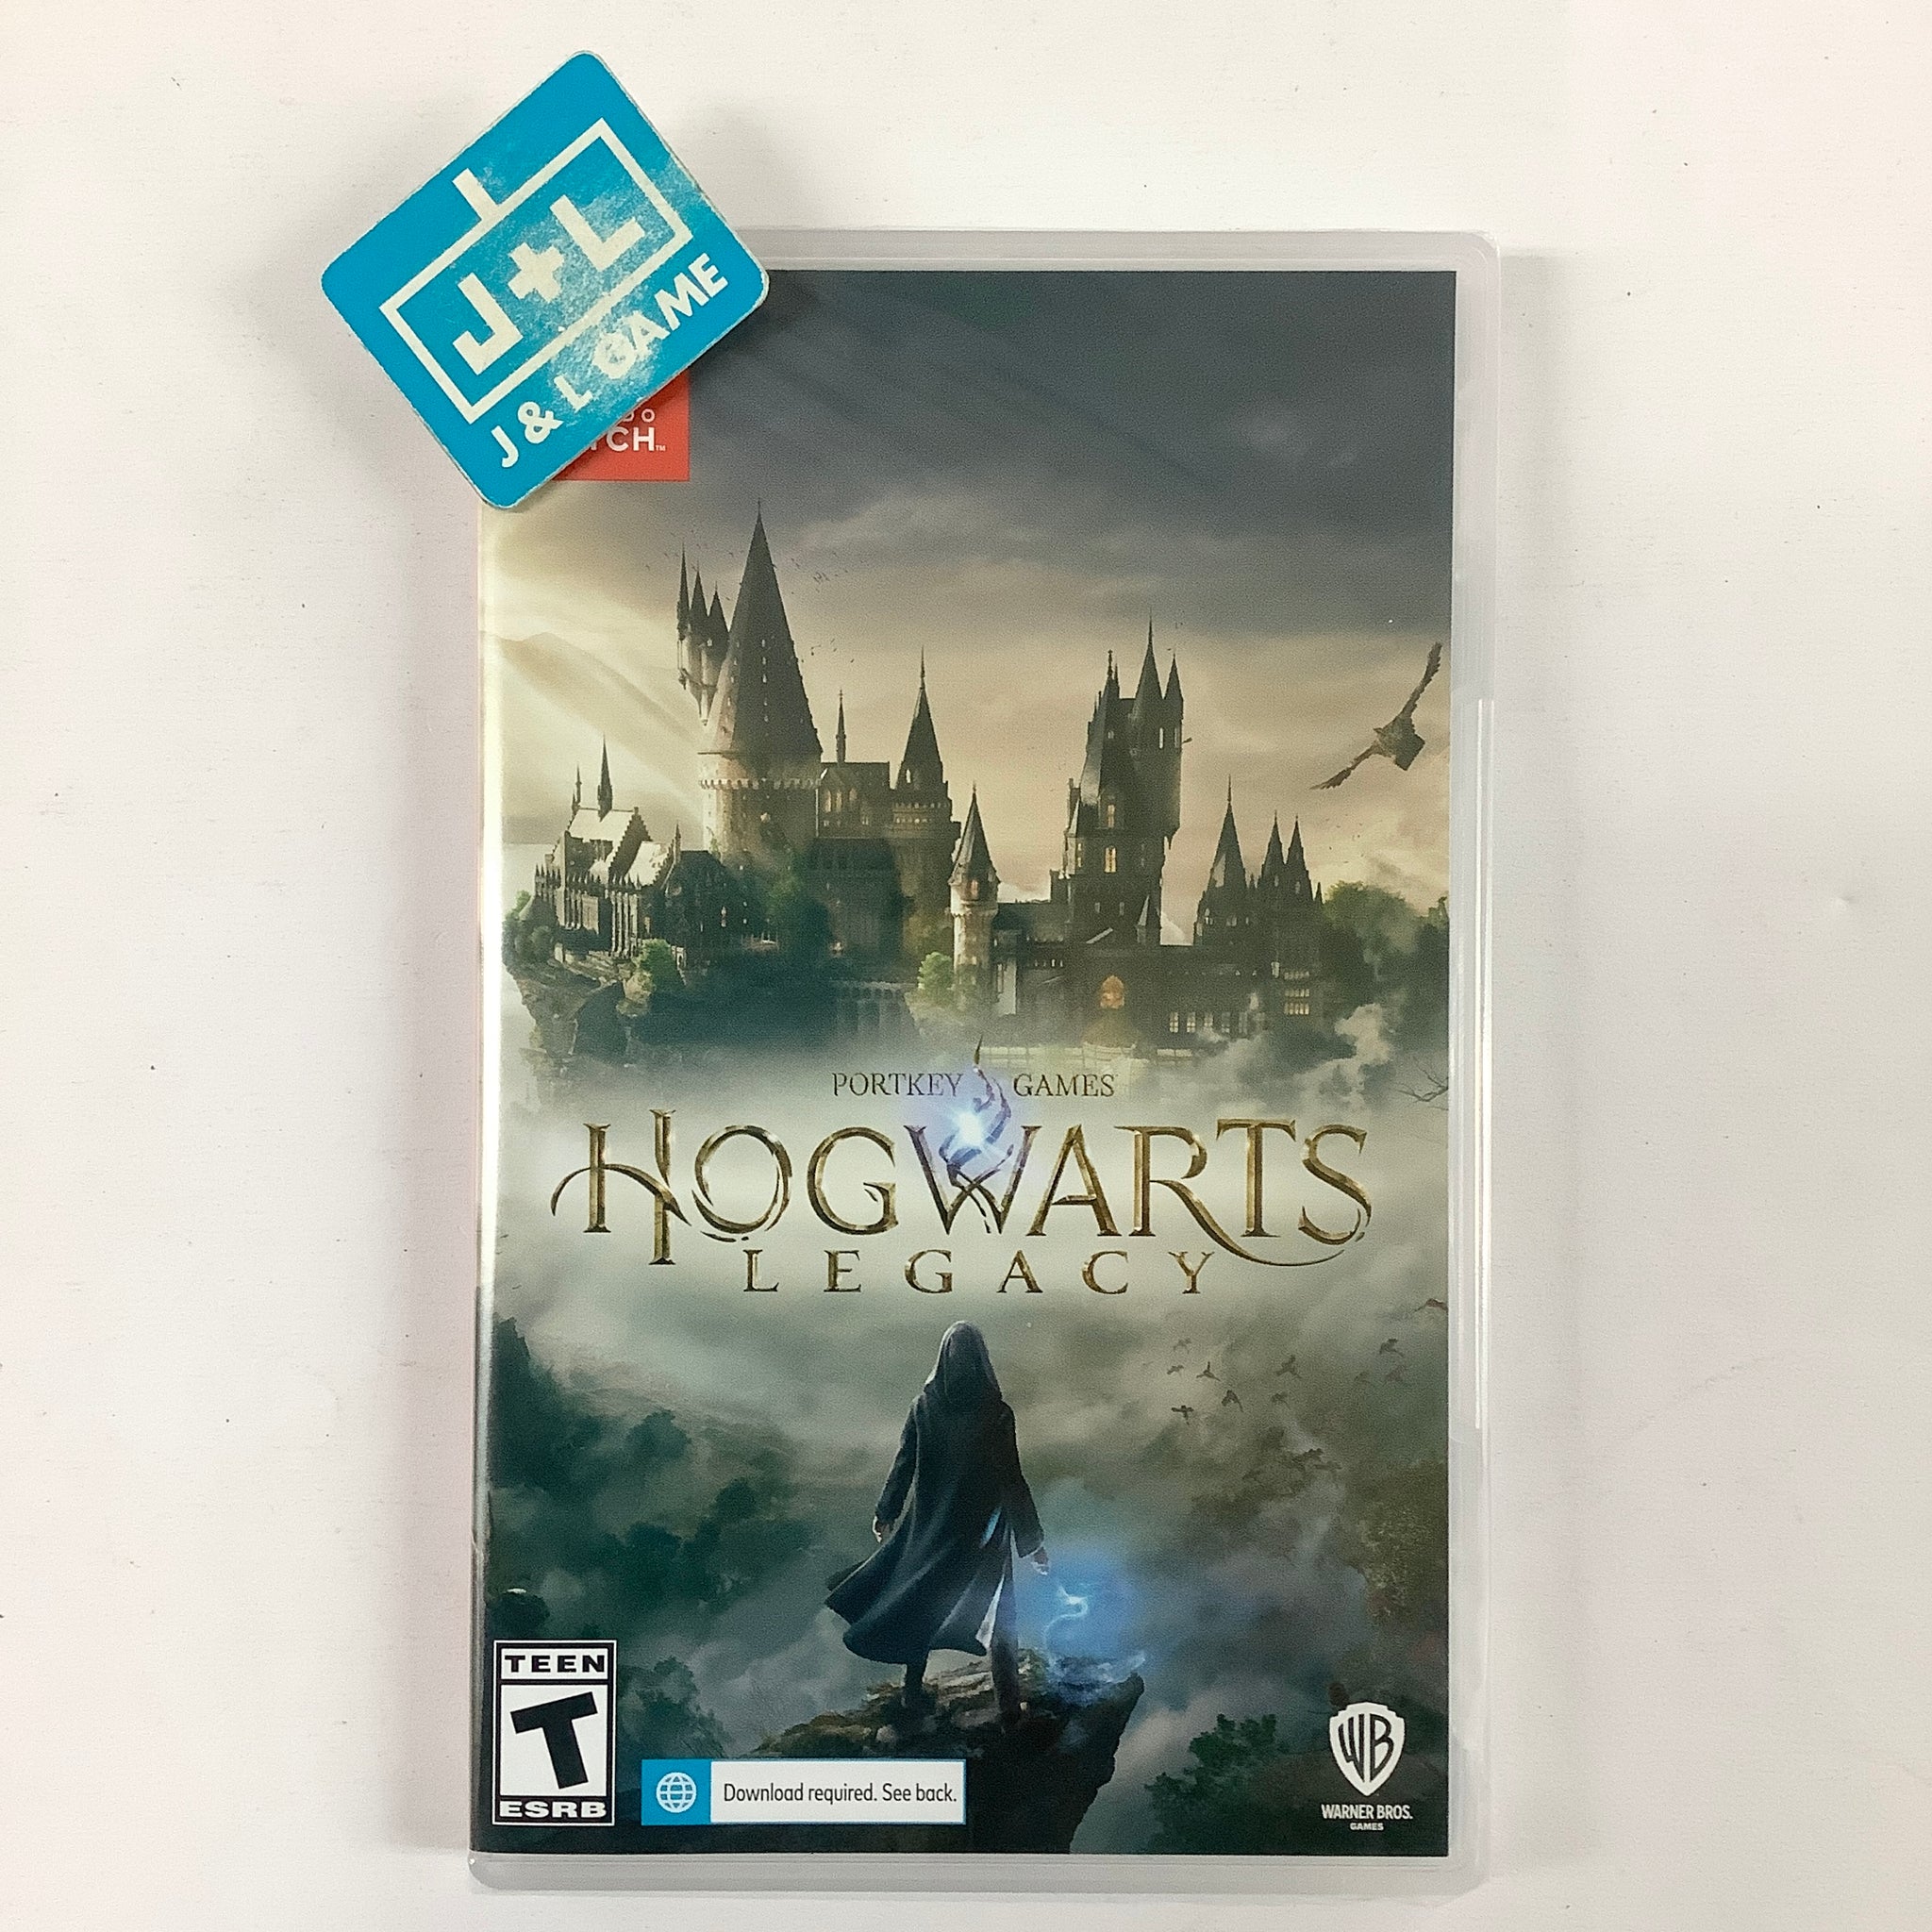 Hogwarts Legacy' Is Now Available on Nintendo Switch: Where to Buy